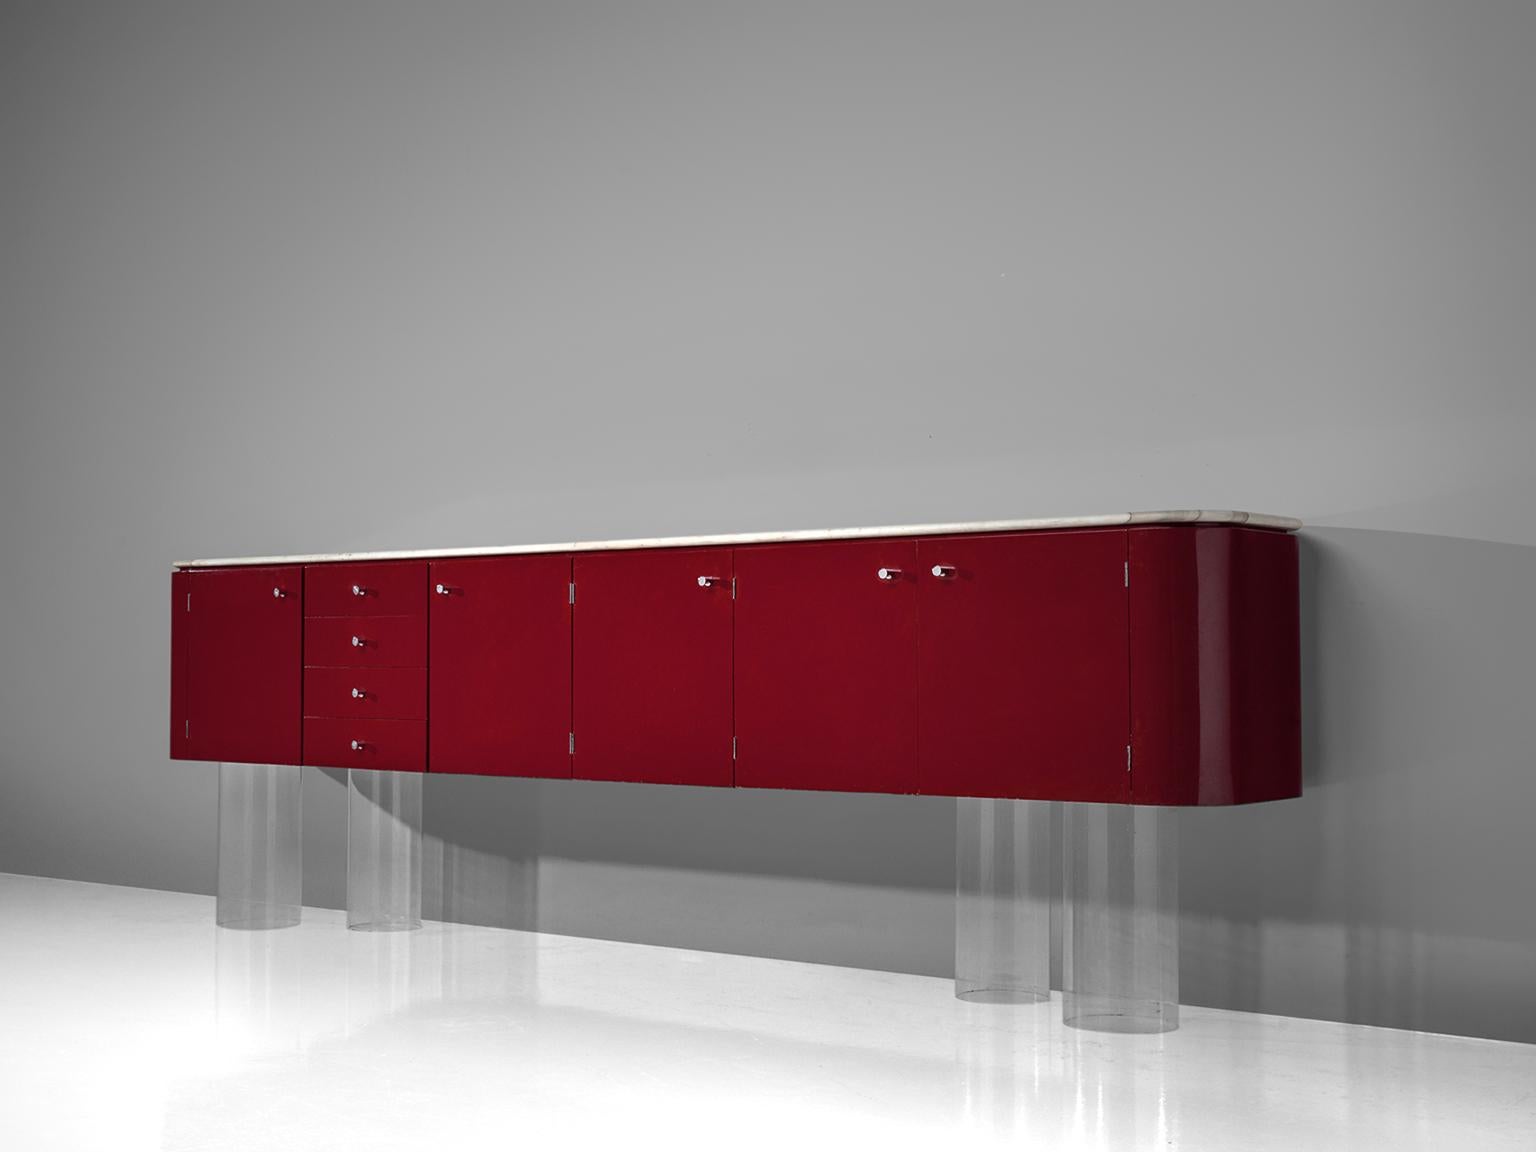 Wall hanging sideboard, lacquered wood and marble, France, 1960s.

This French sideboard is part of our midcentury collection. The large sideboard is lacquered in burgundy-red color and features metal details. The corners are curved which is in